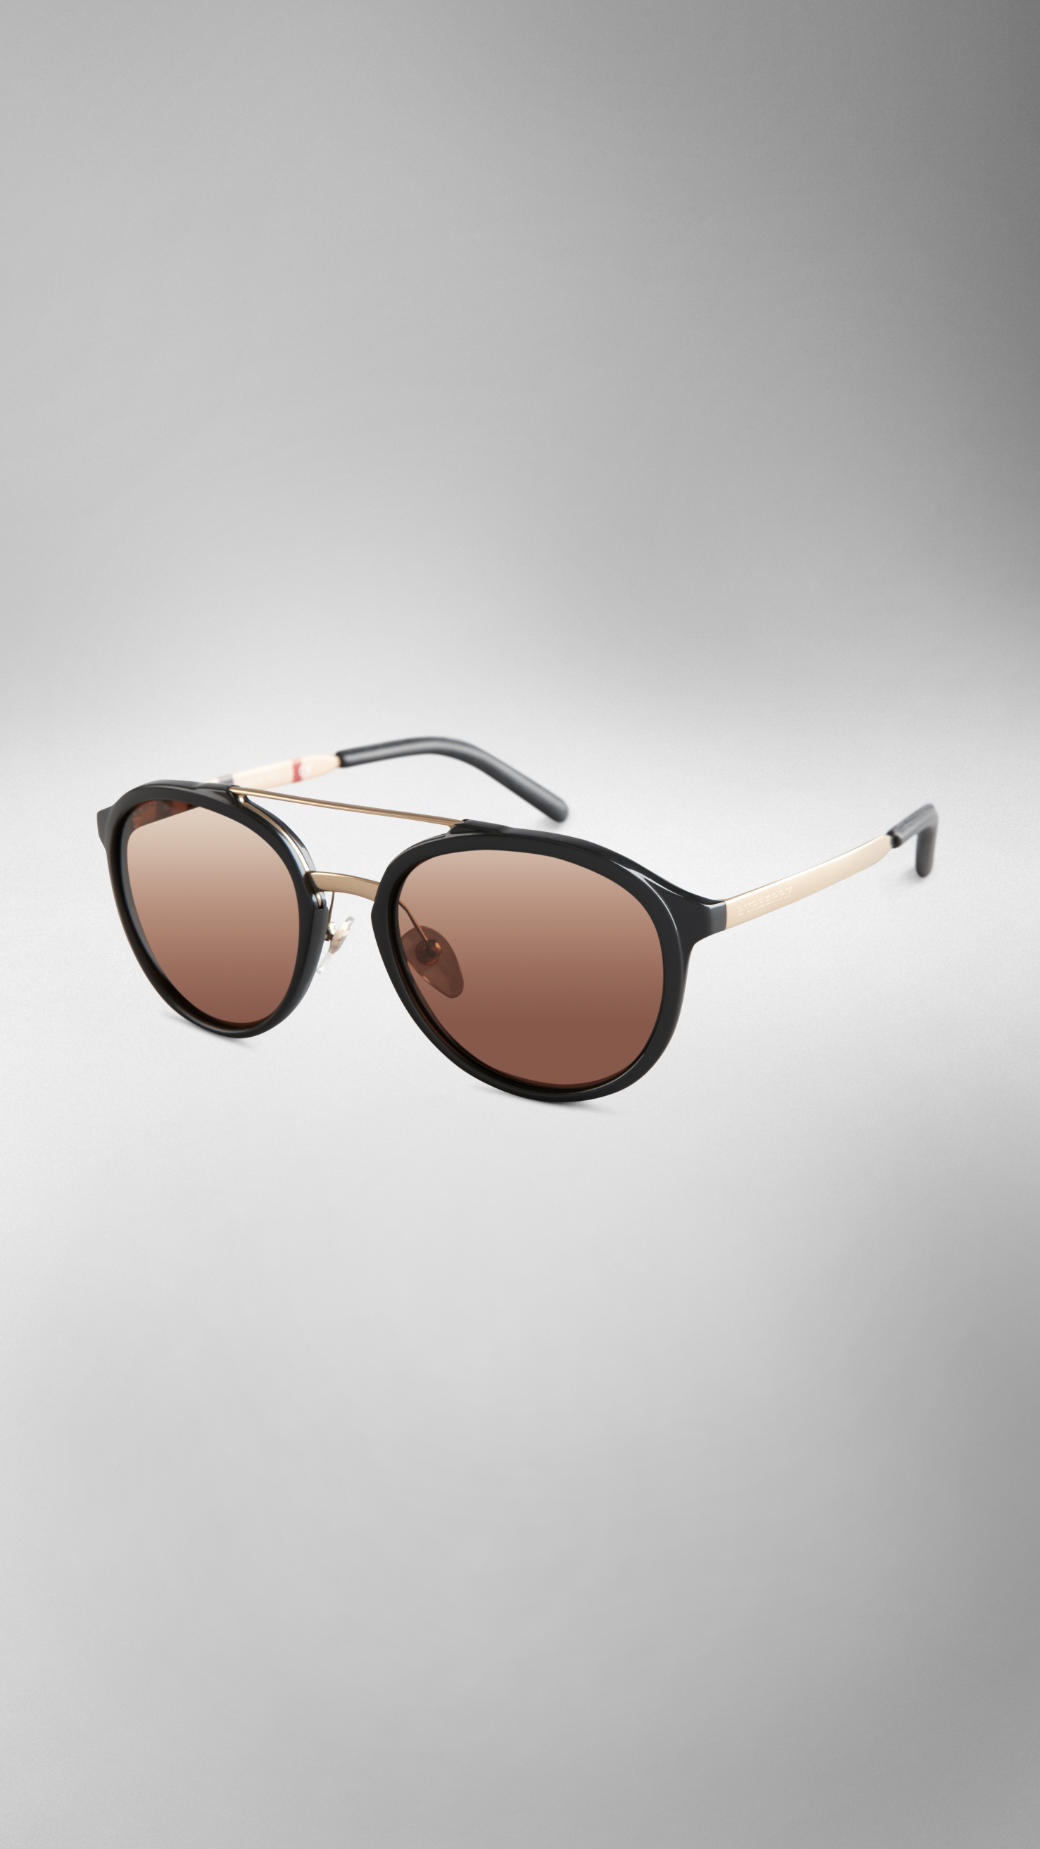 Burberry Trench Collection Round Frame Sunglasses Clearance, 50% OFF |  www.chine-magazine.com